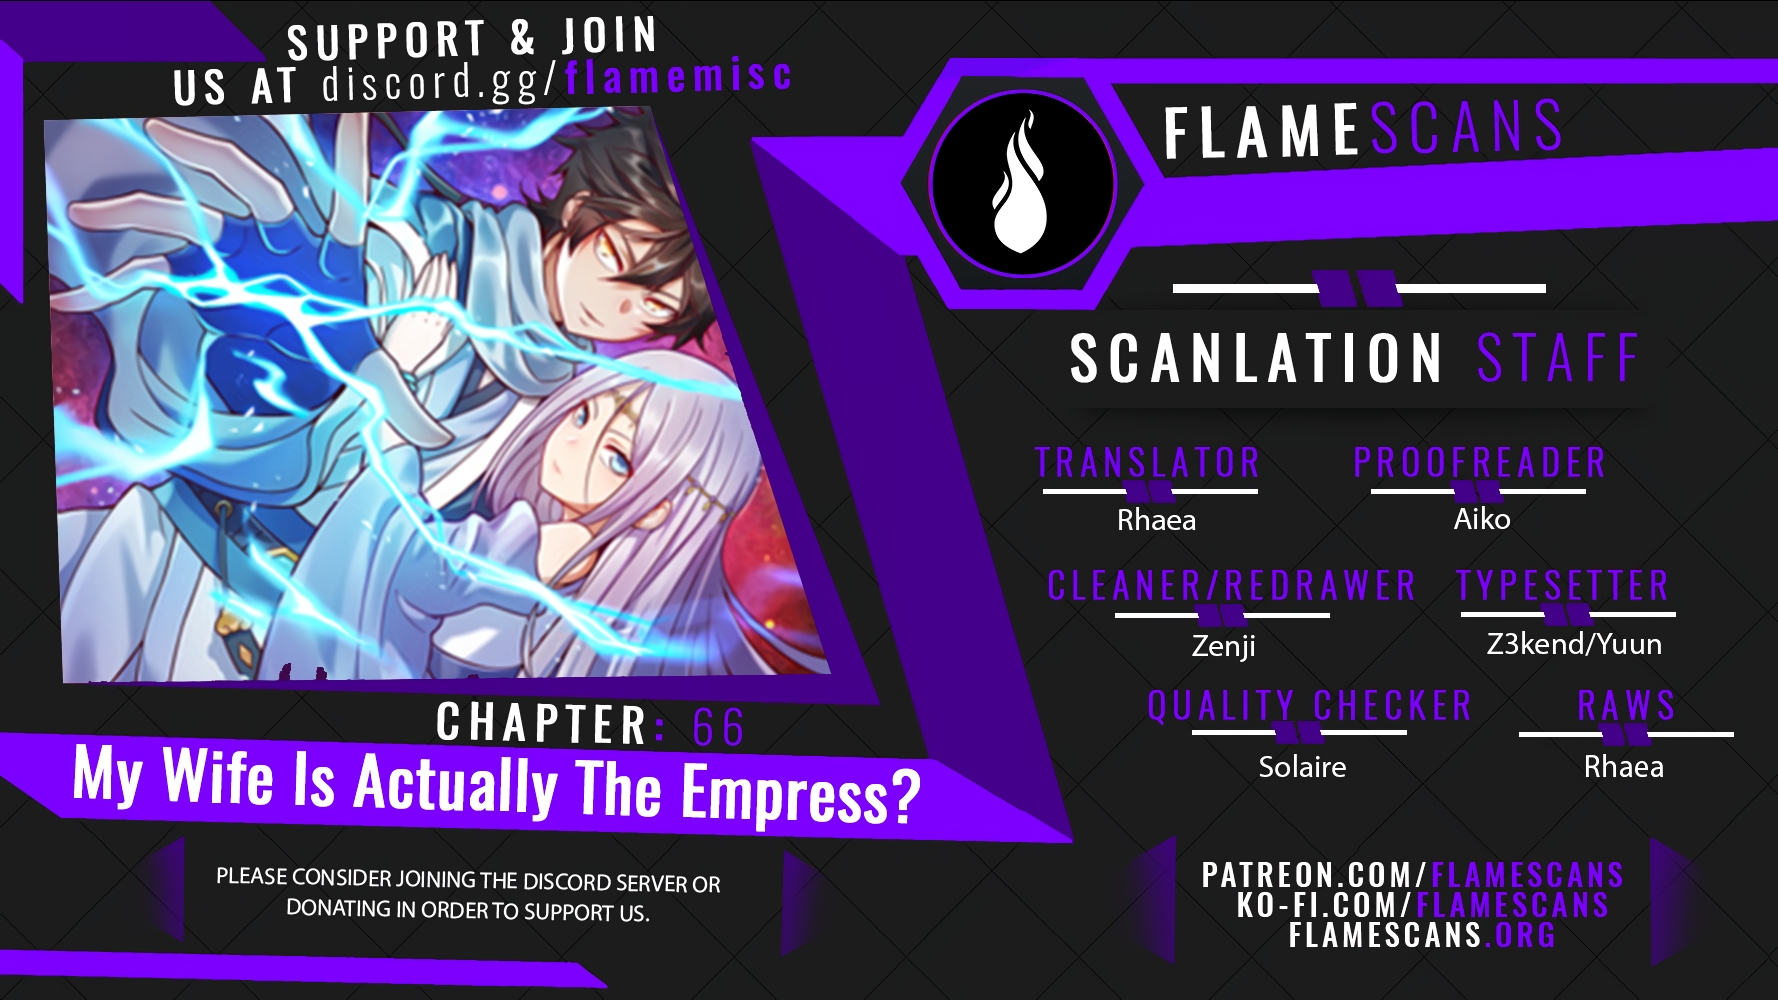 My Wife Is Actually The Empress? - Chapter 14176 - Image 1